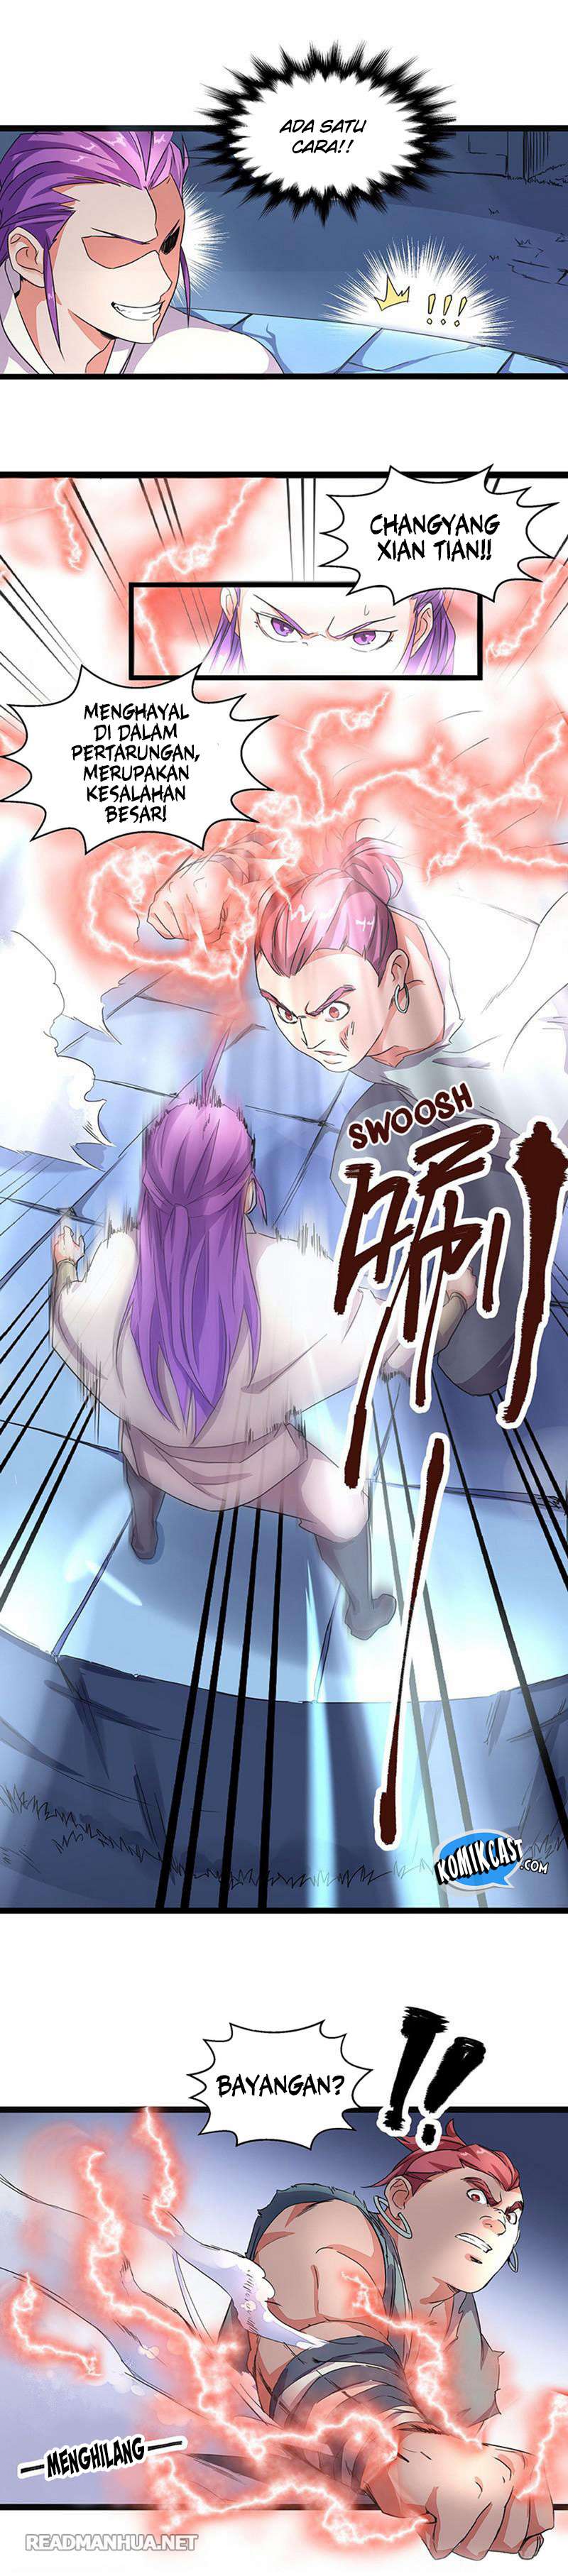 Chaotic Sword God Chapter 05